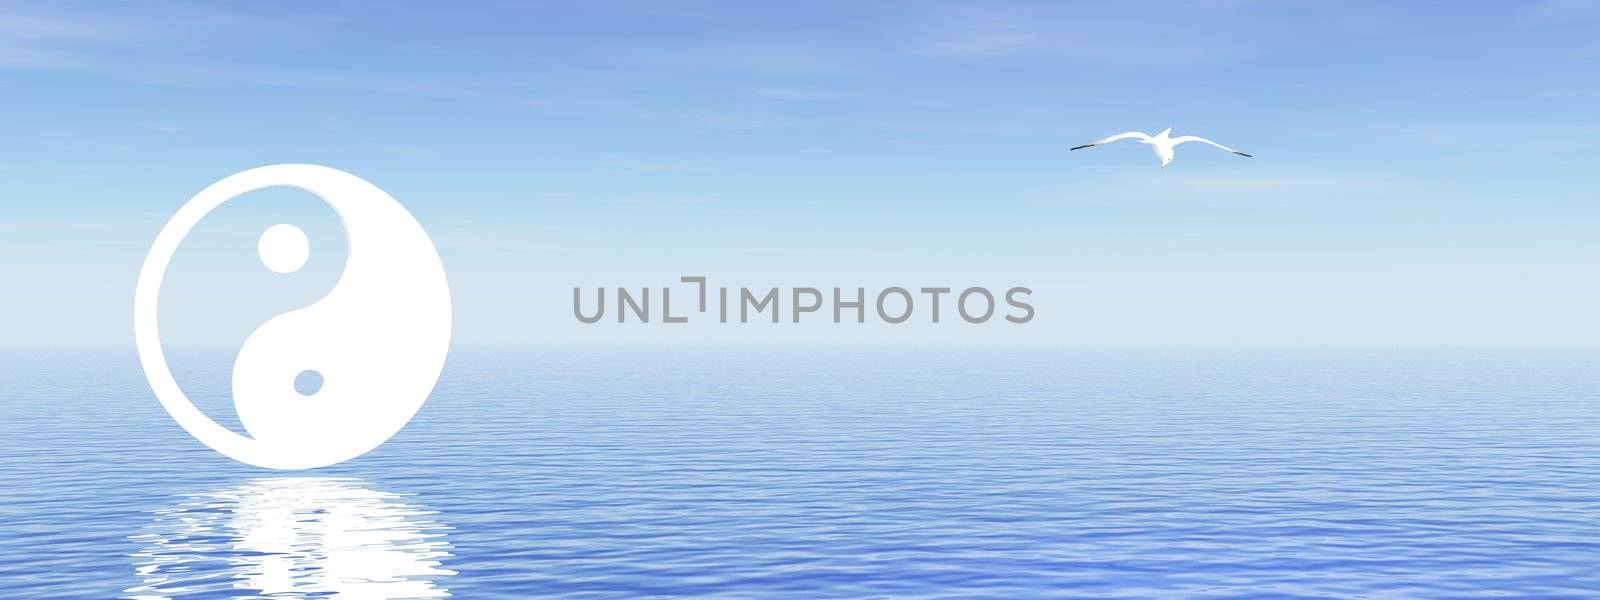 White yin and yang symbol and a seagull in a blue background with ocean